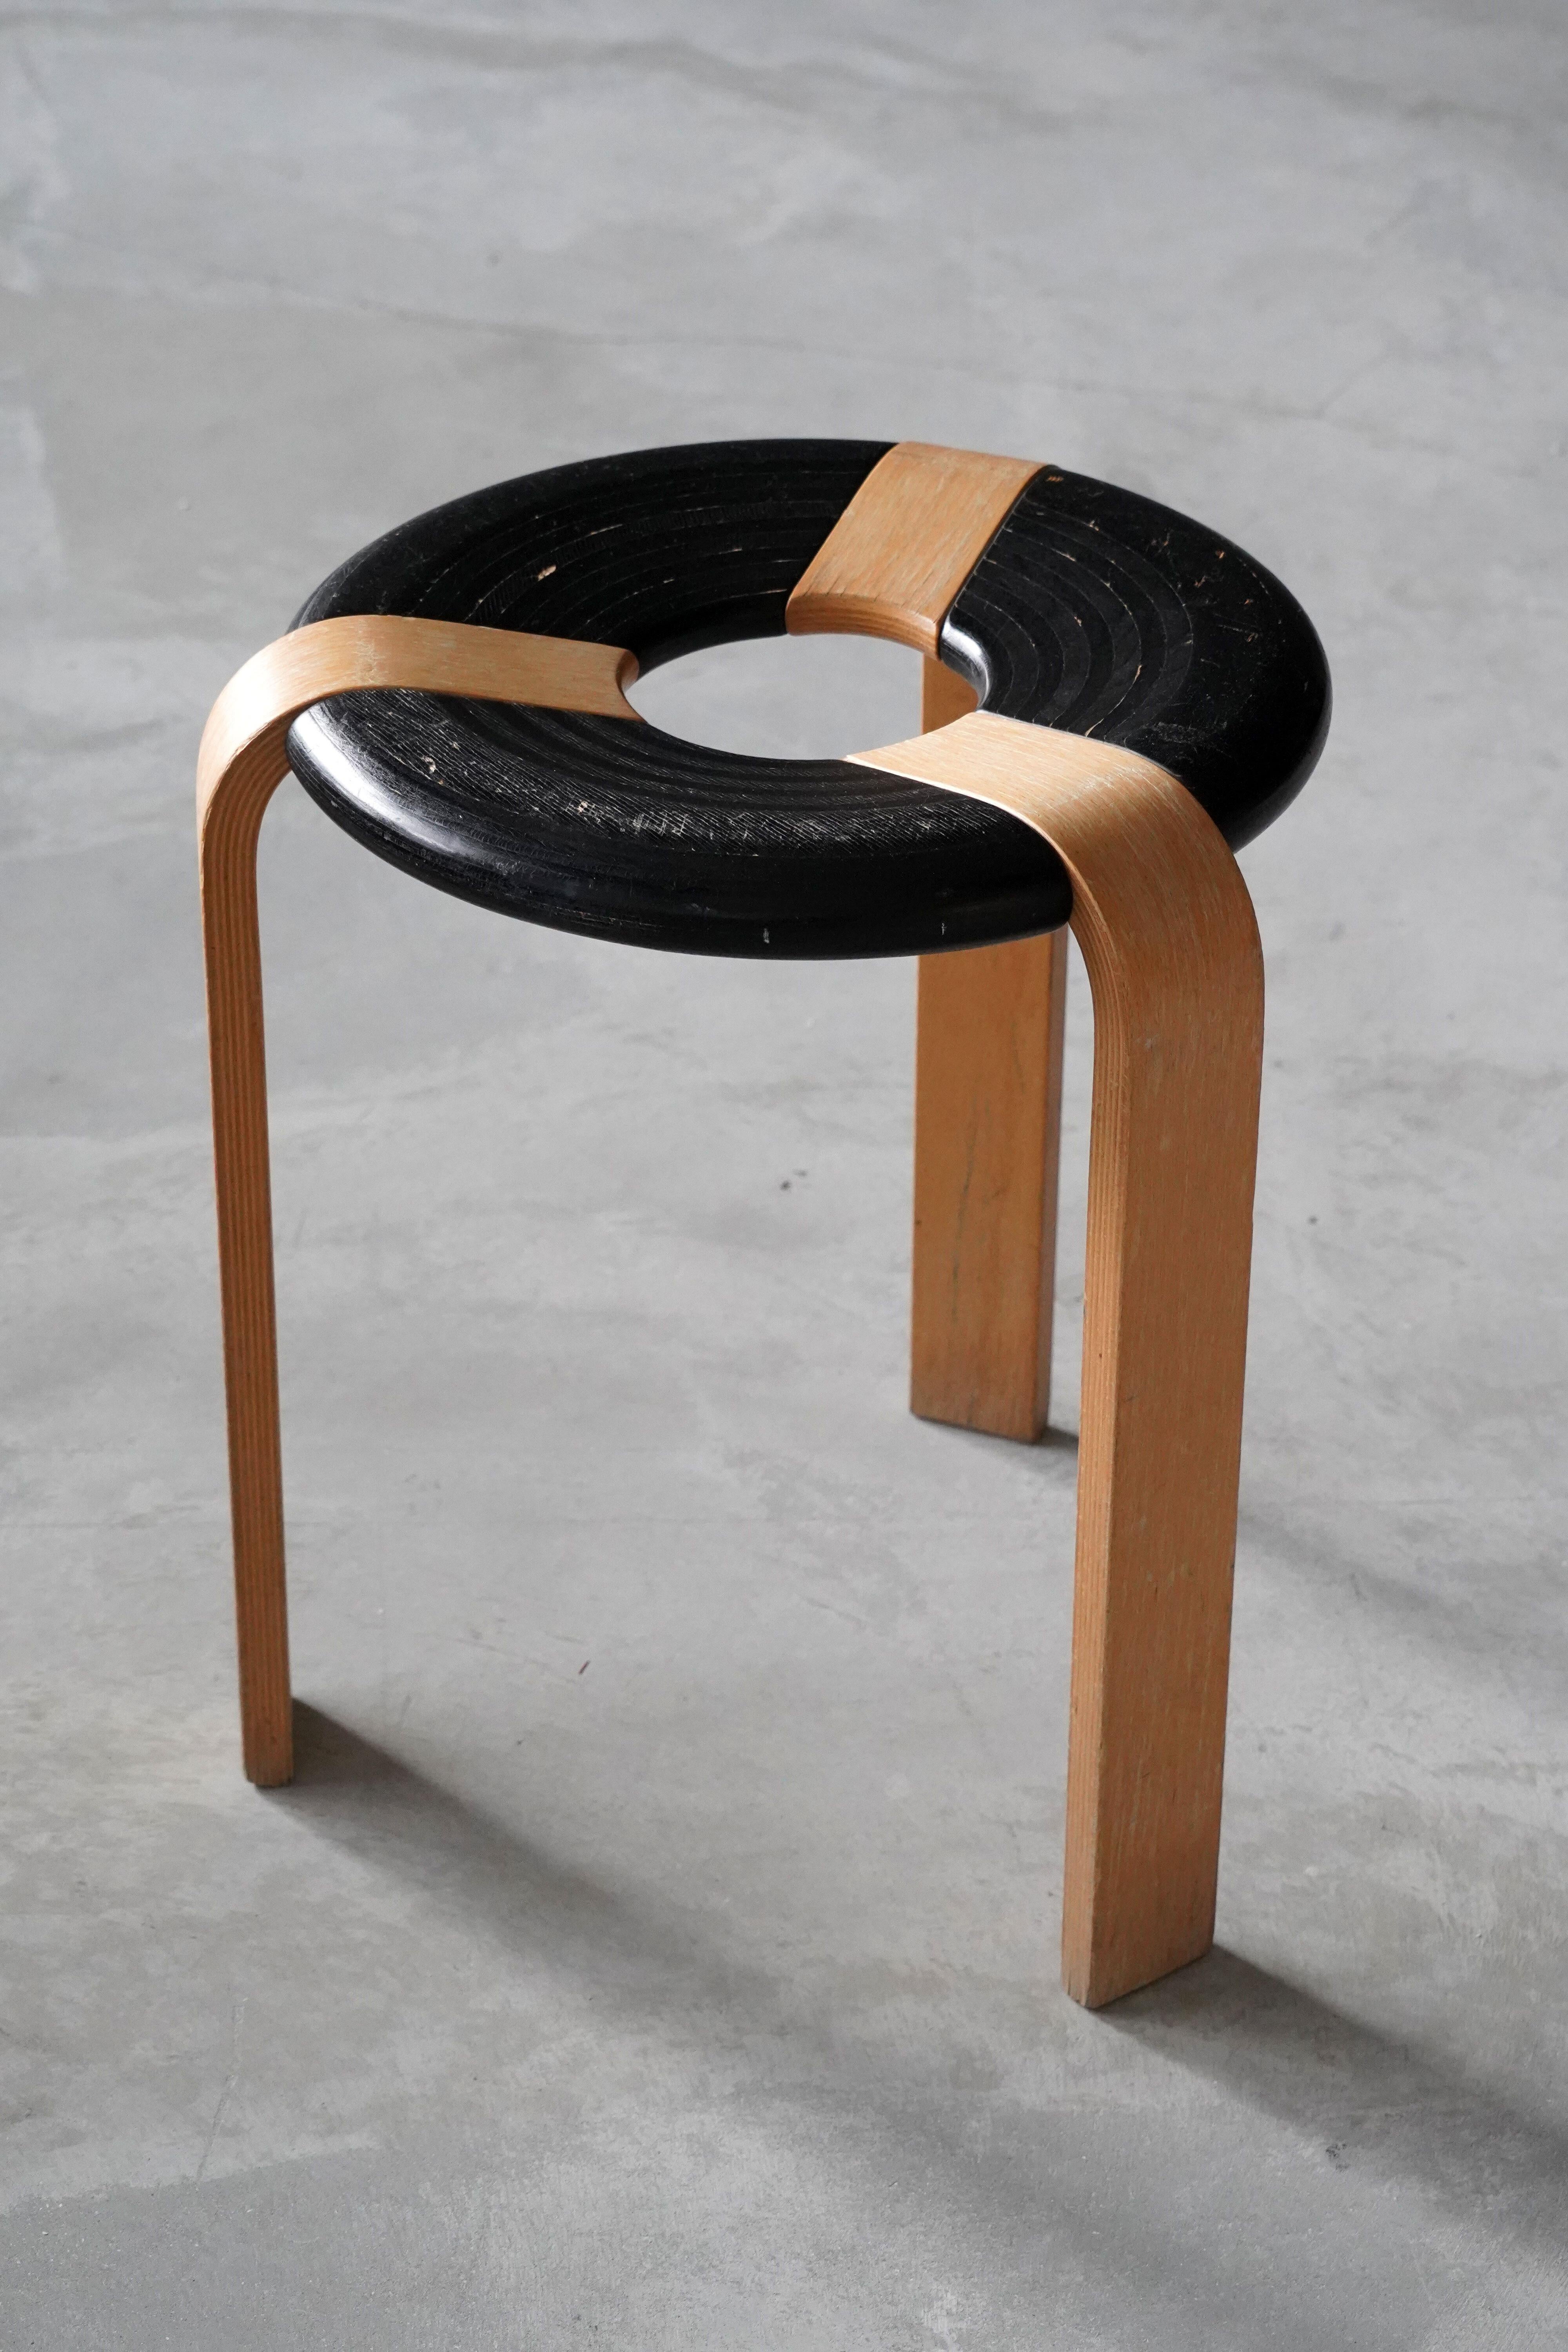 An early production all original oak stool by Rud Thygesen and Johnny Sorensen. For Magnus Olsen, Denmark, designed in 1971. With excellent original patina. Stackable.

Other designers of the period include Charlotte Perriand, Pierre Chapo, Hans